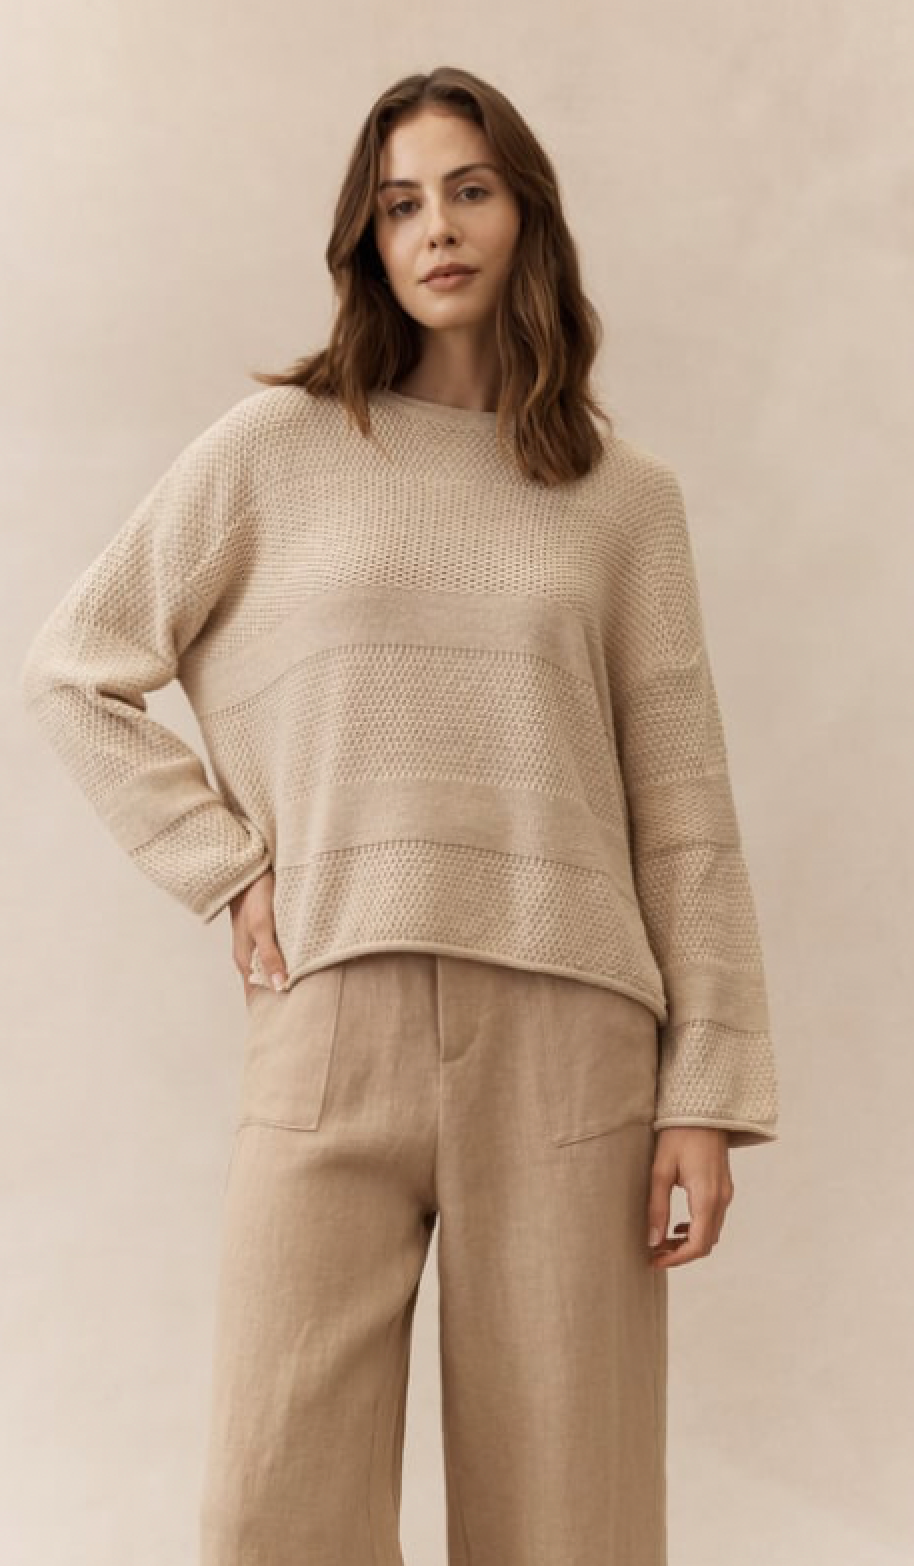 rowie jumper by little lies is a knitted textured burnt orange pull on sweater